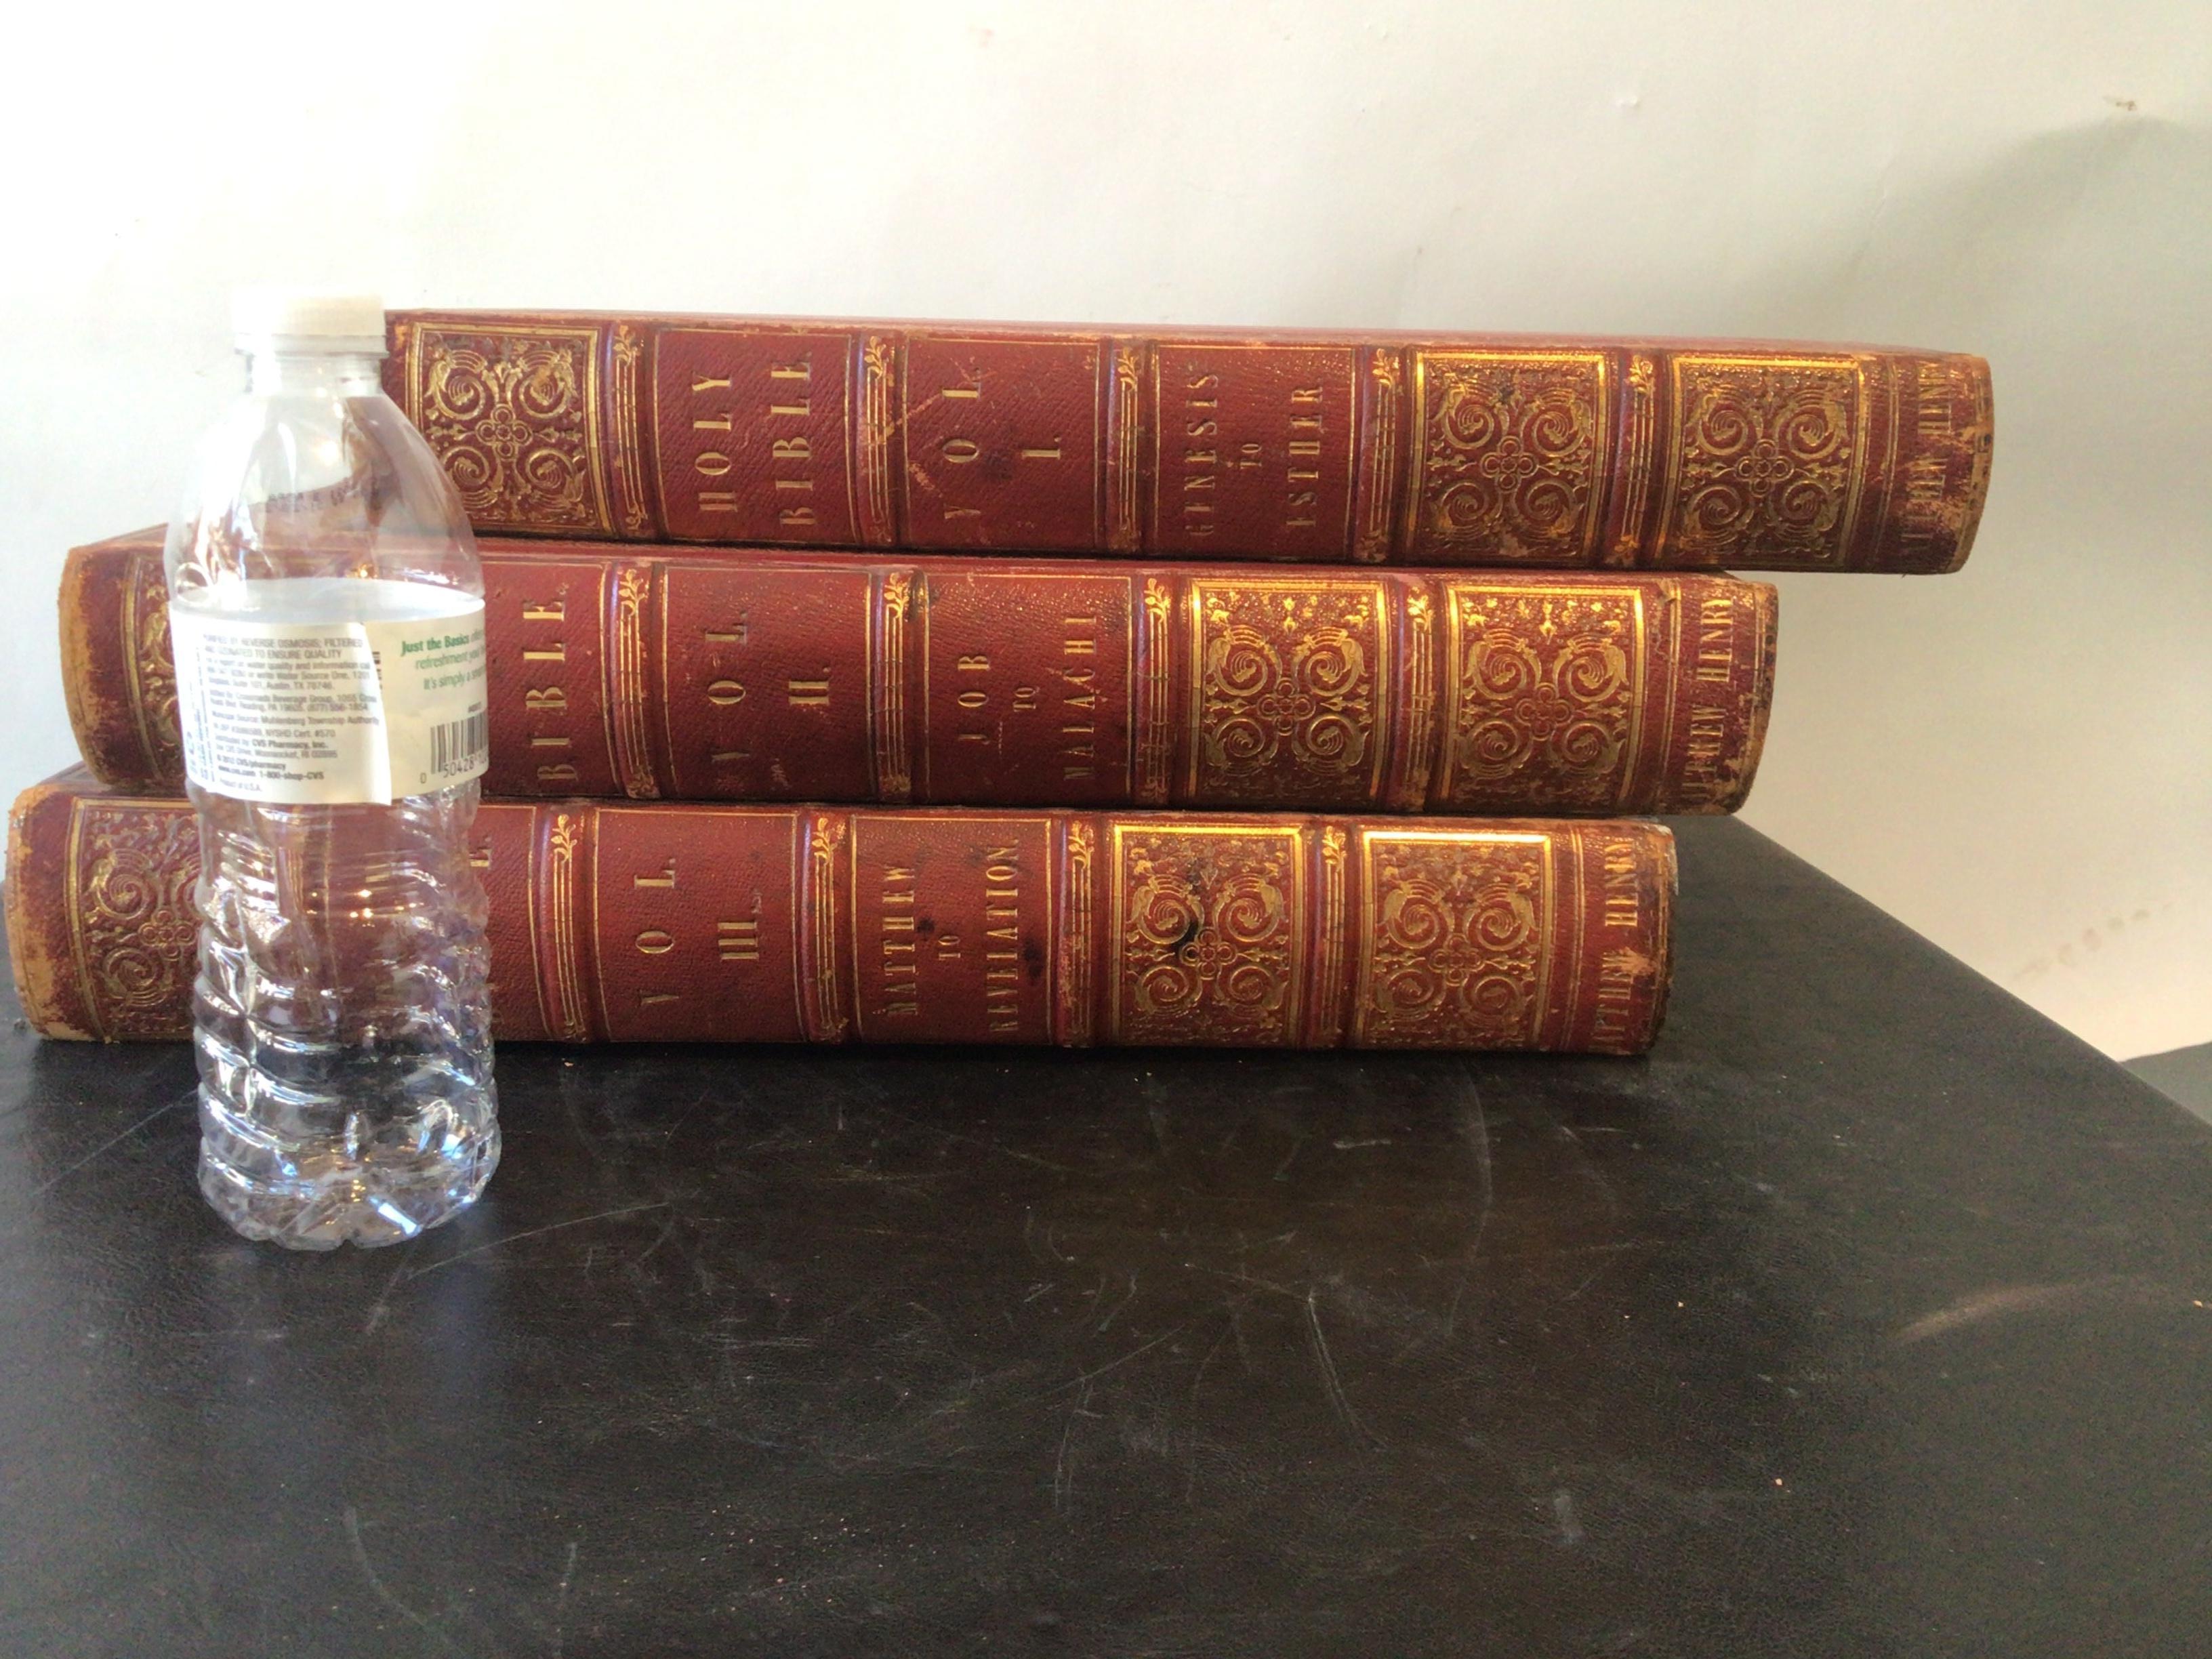 1820s Mathew Henry leather bound bible commentary. 3 Volume set. Gilt pages.
 